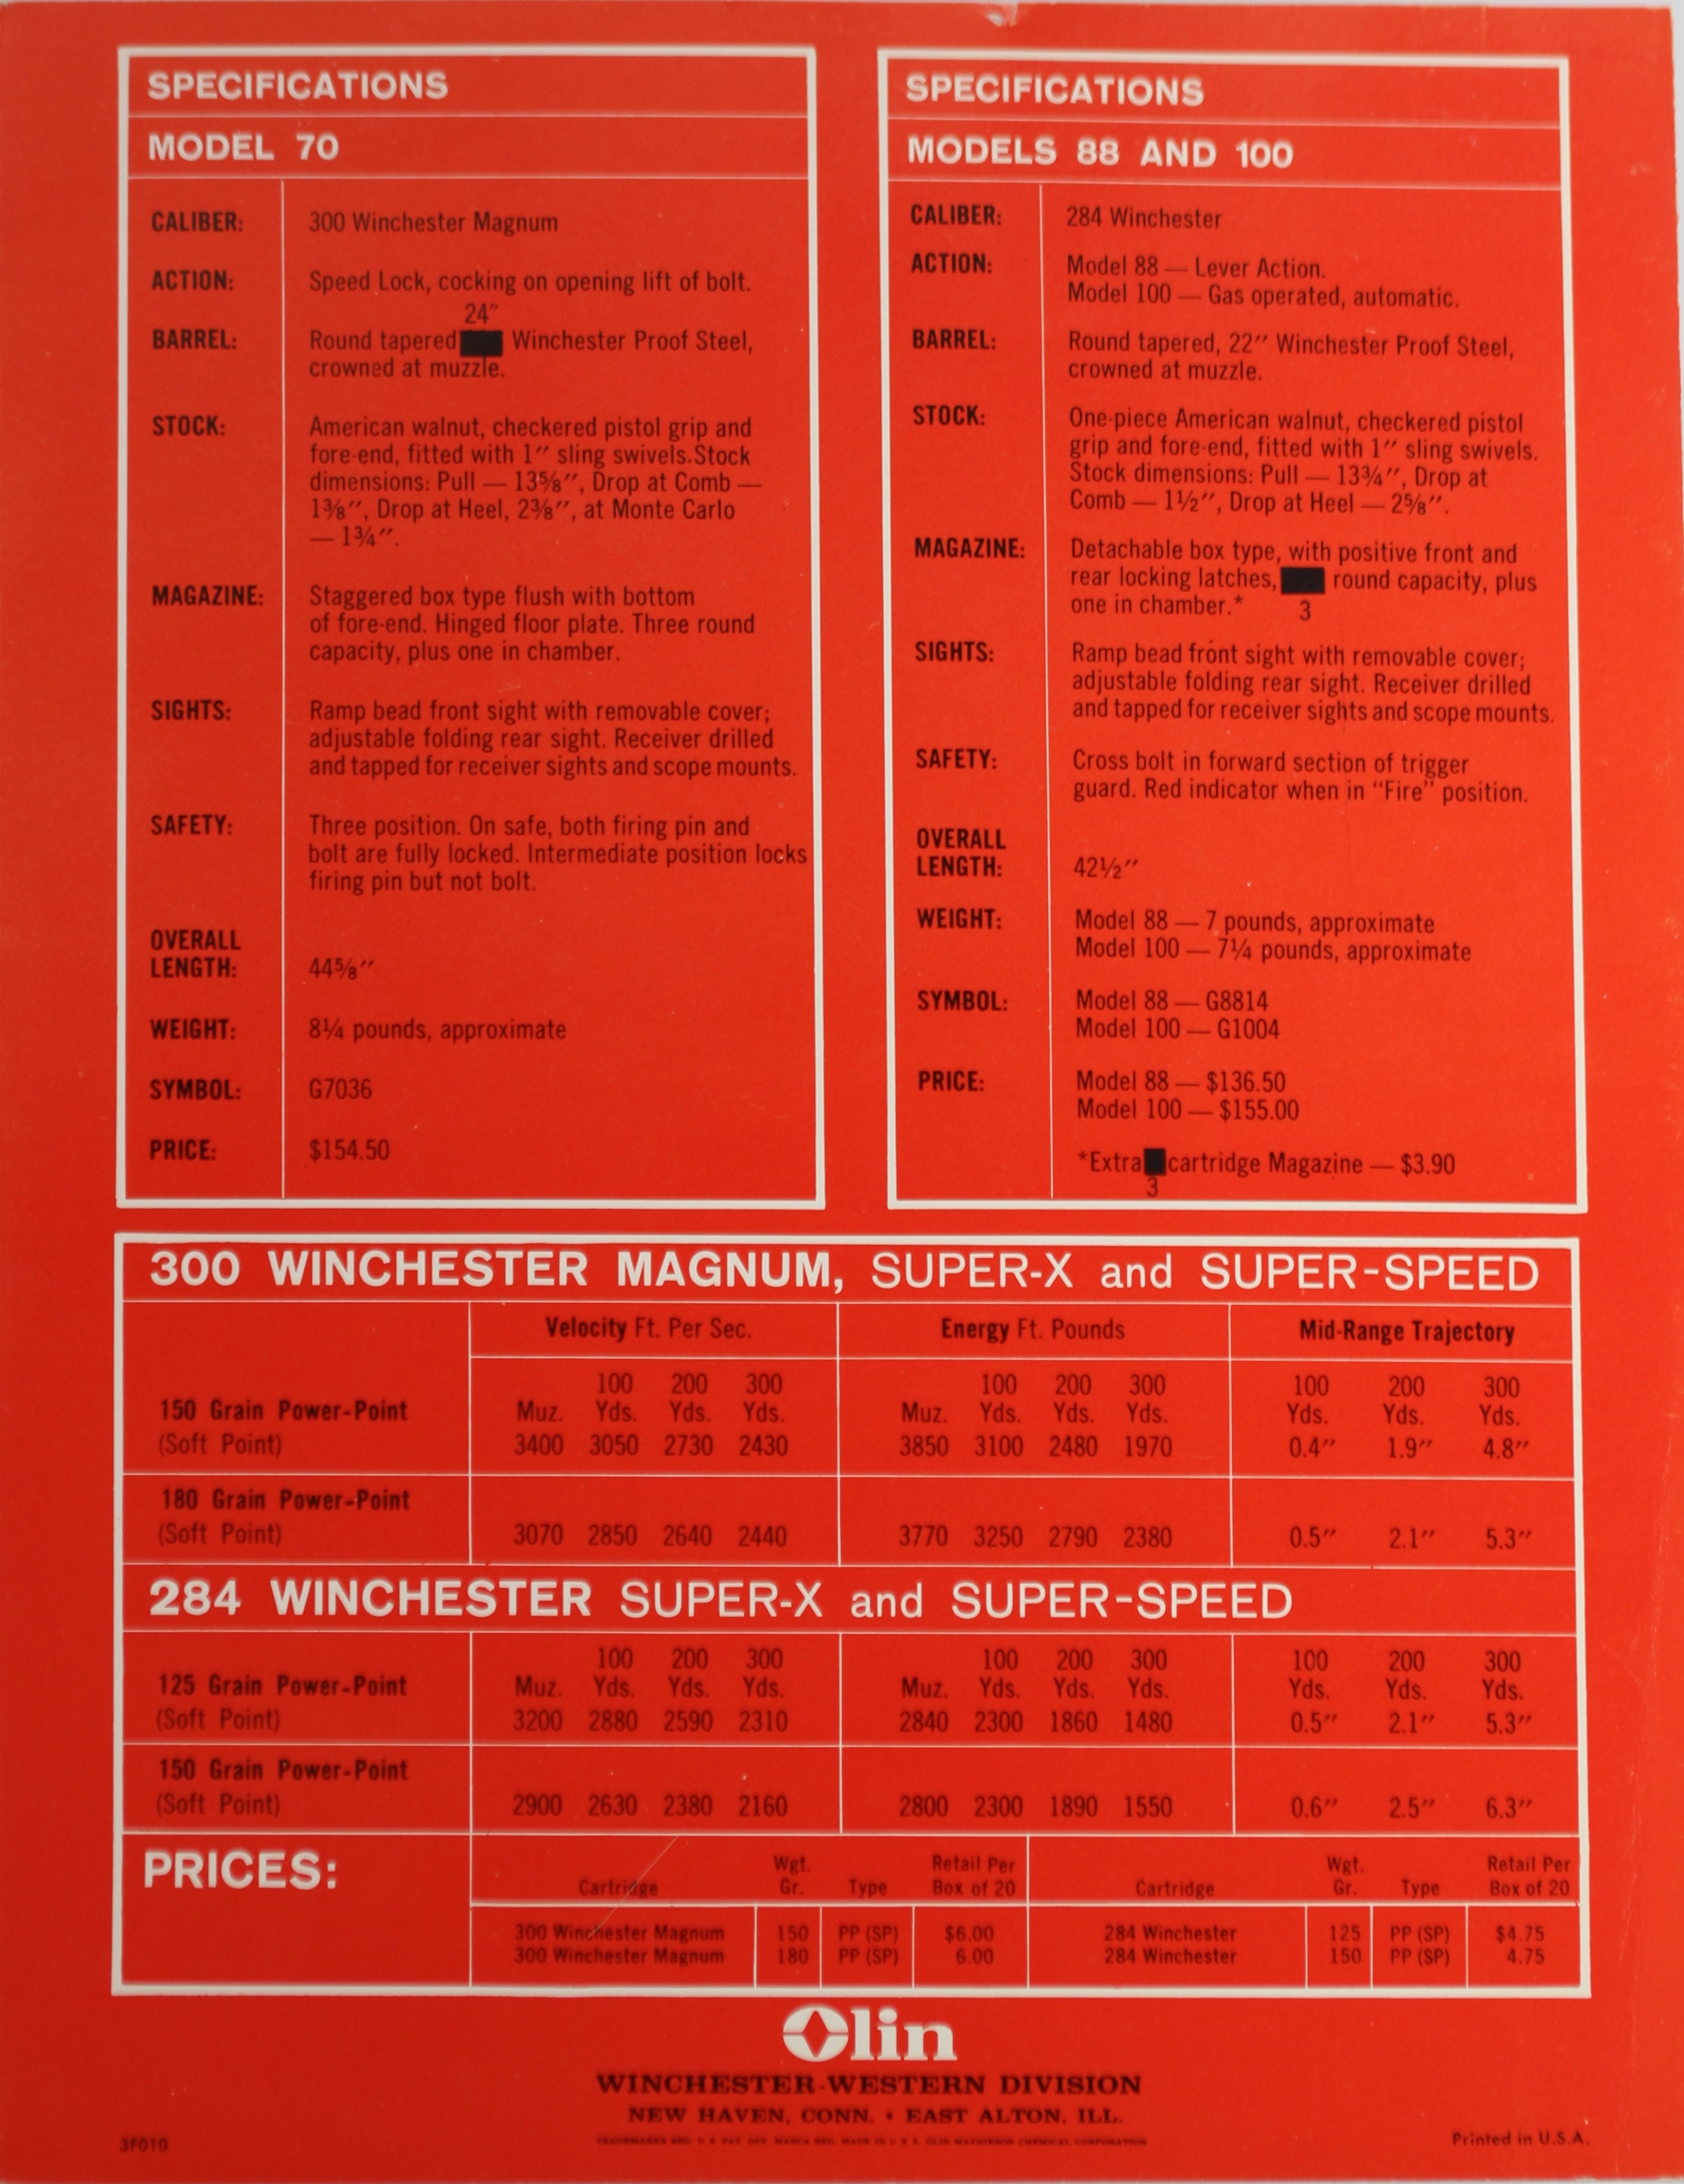 Winchester Foldout Brochure:  3 Great Winchesters Made Even Greater